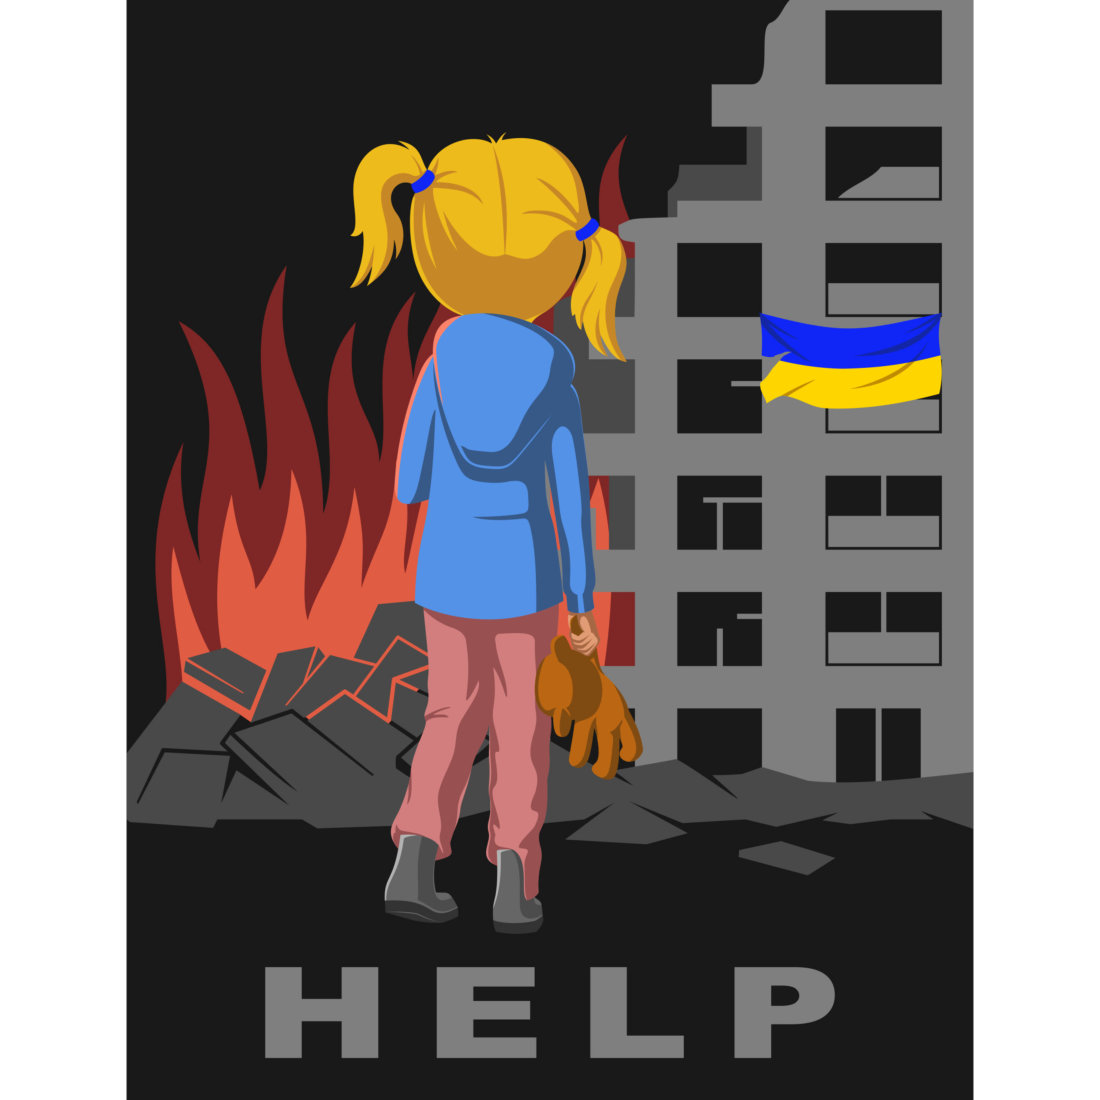 Save, Help Ukraine, Stop War Posters cover image.